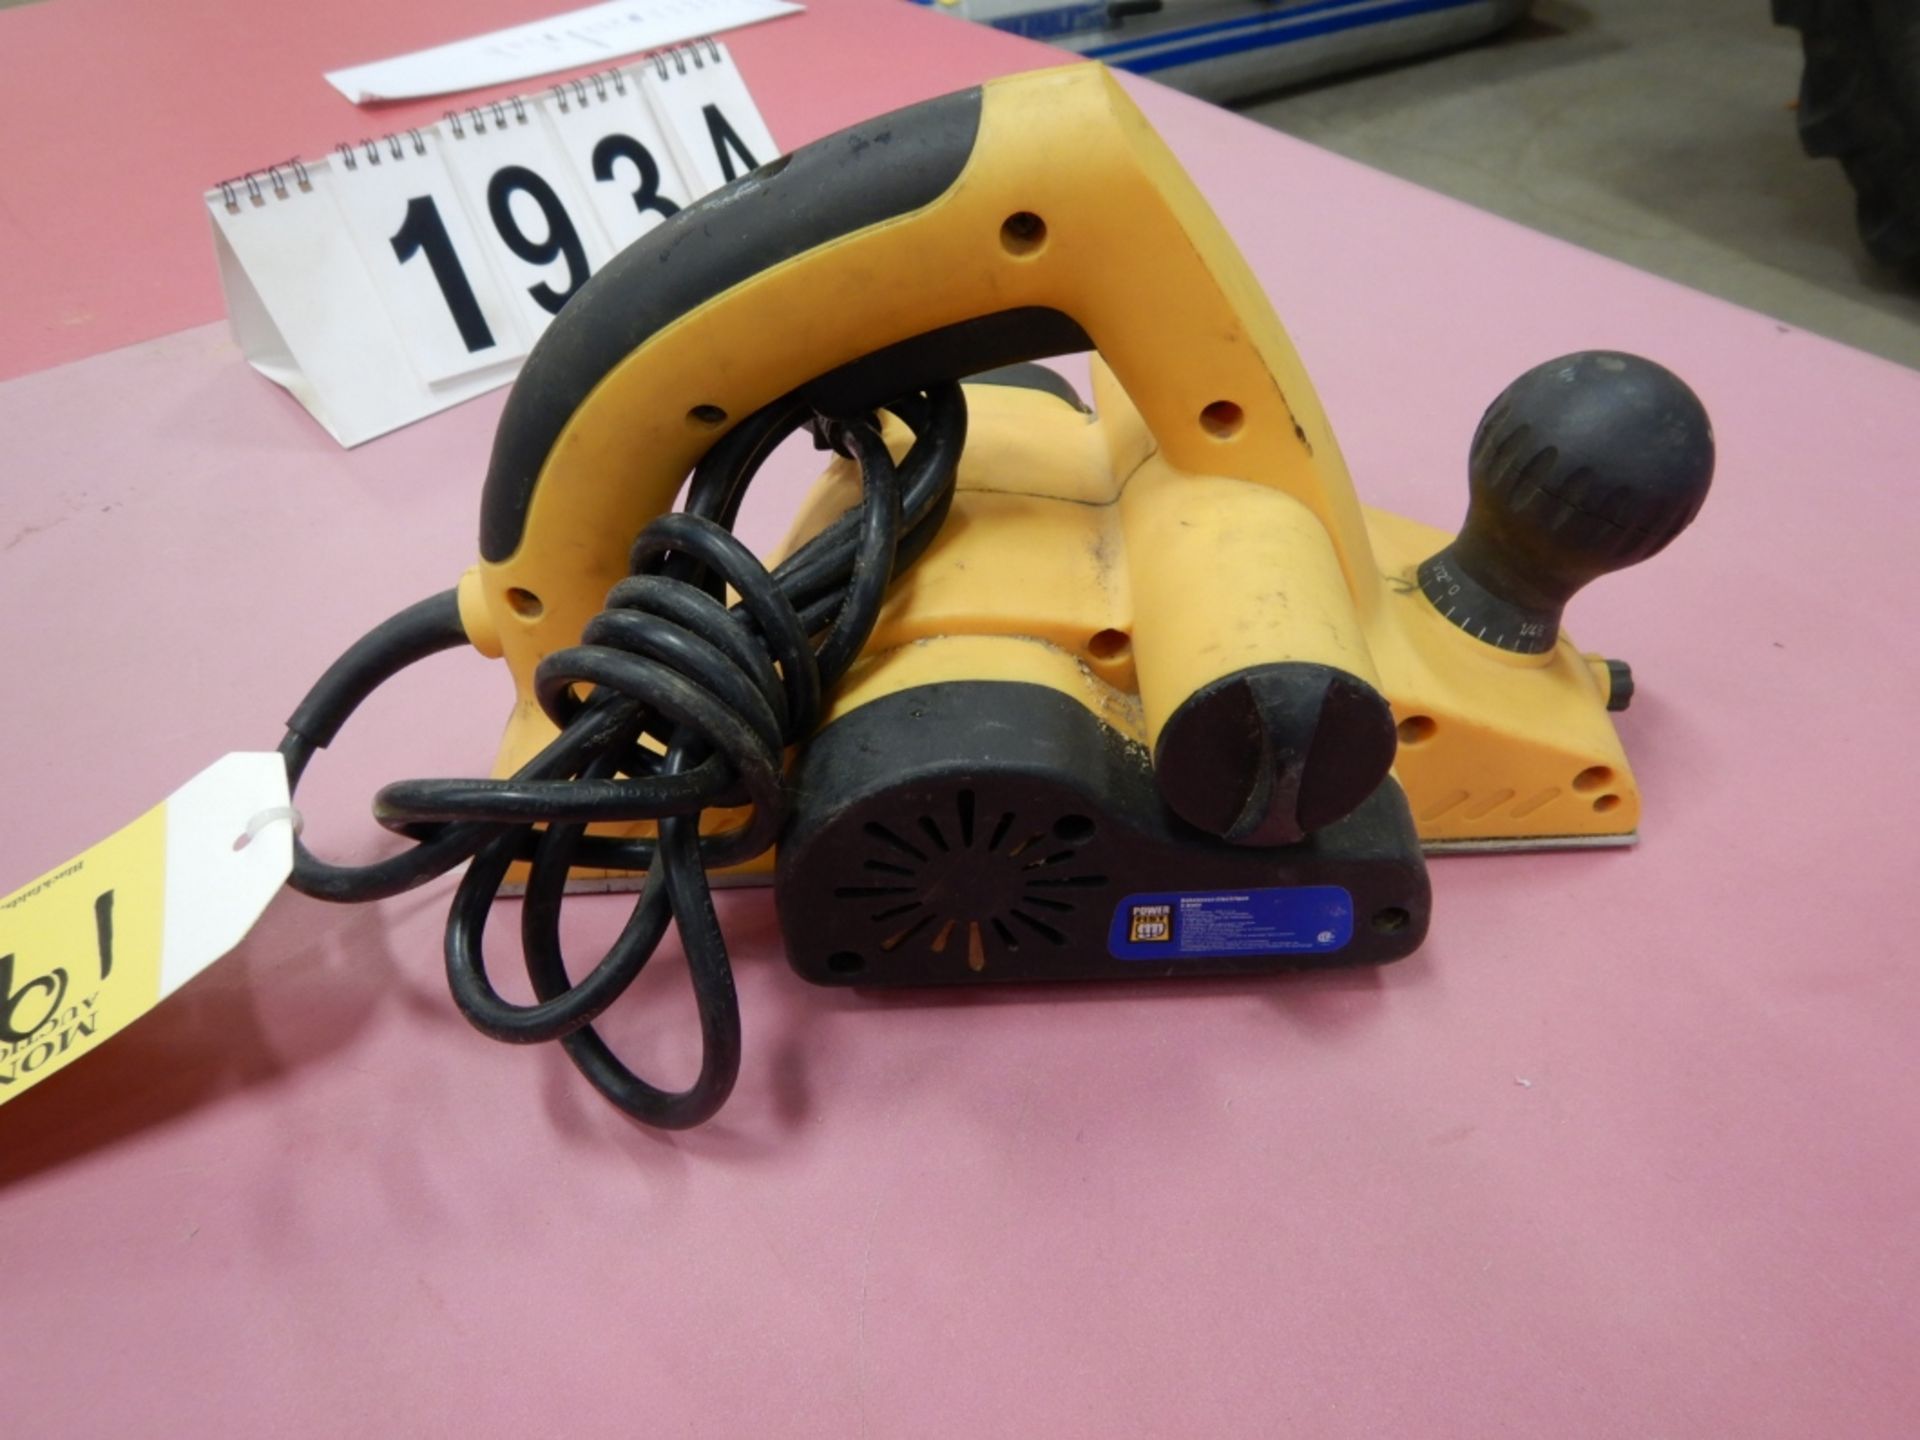 POWER FIST 3" ELECTRIC POWER PLANER - Image 3 of 3